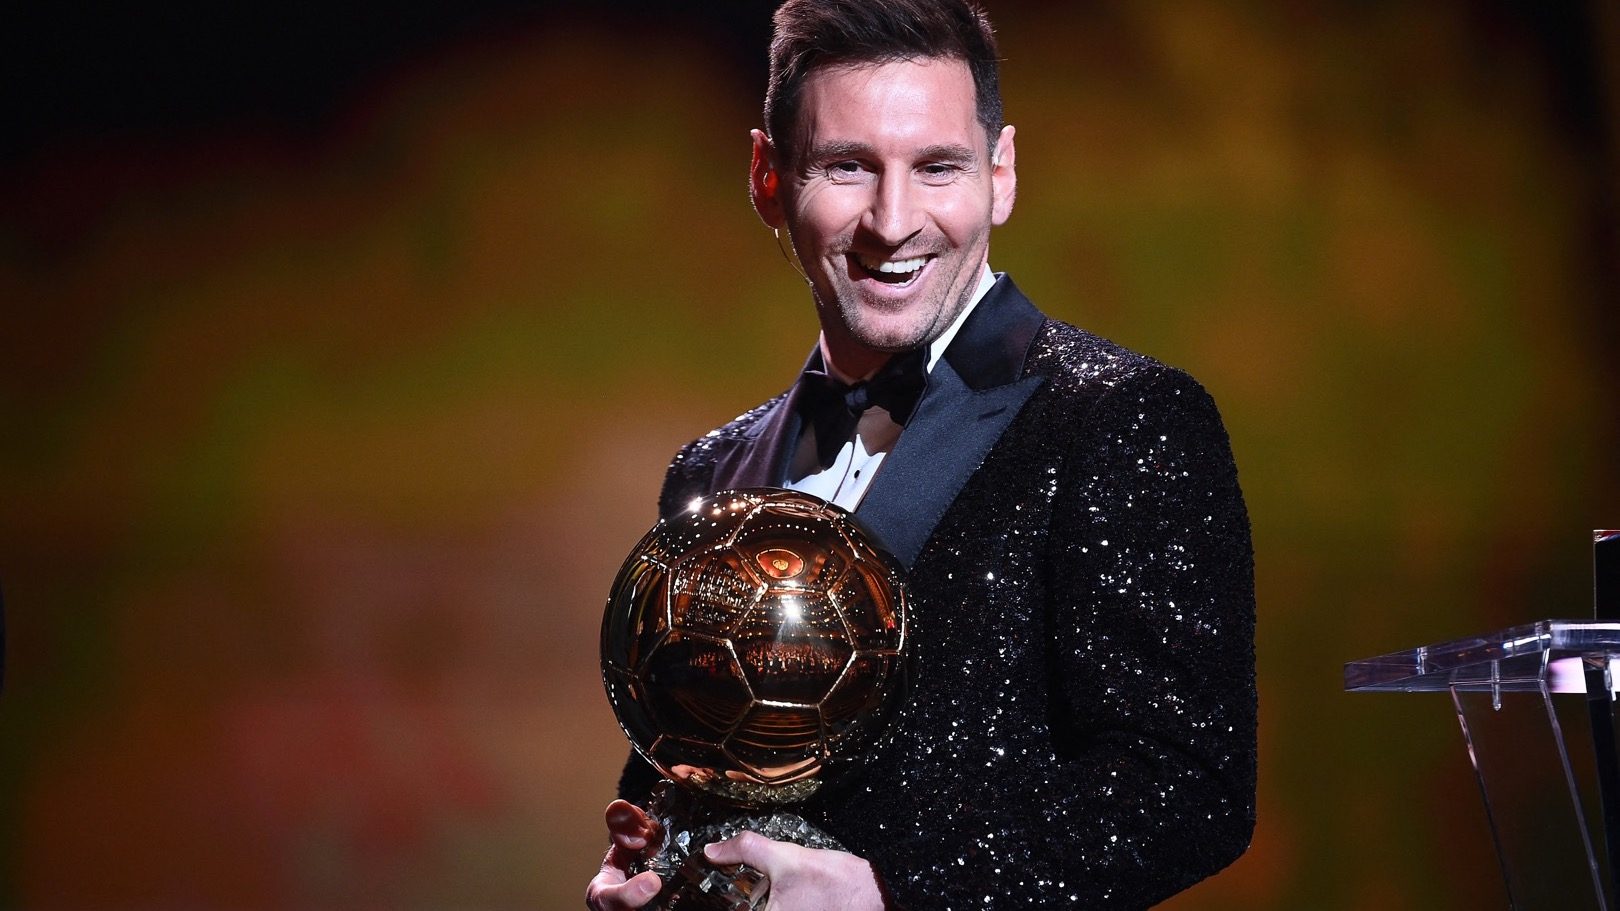 Fifa to merge with Ballon d'Or, Football News